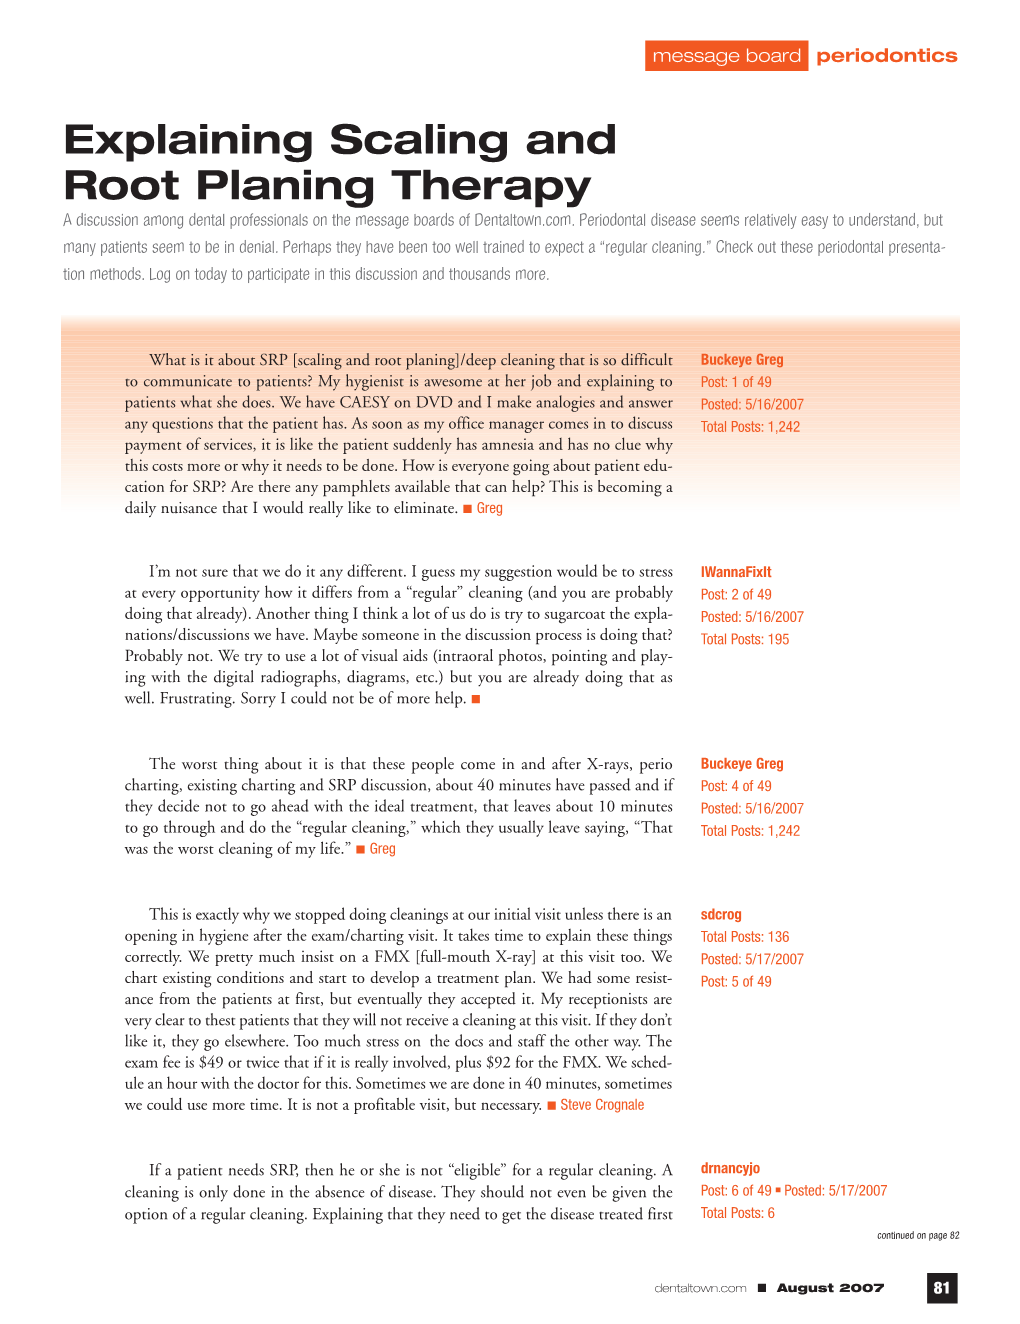 Explaining Scaling and Root Planing Therapy a Discussion Among Dental Professionals on the Message Boards of Dentaltown.Com